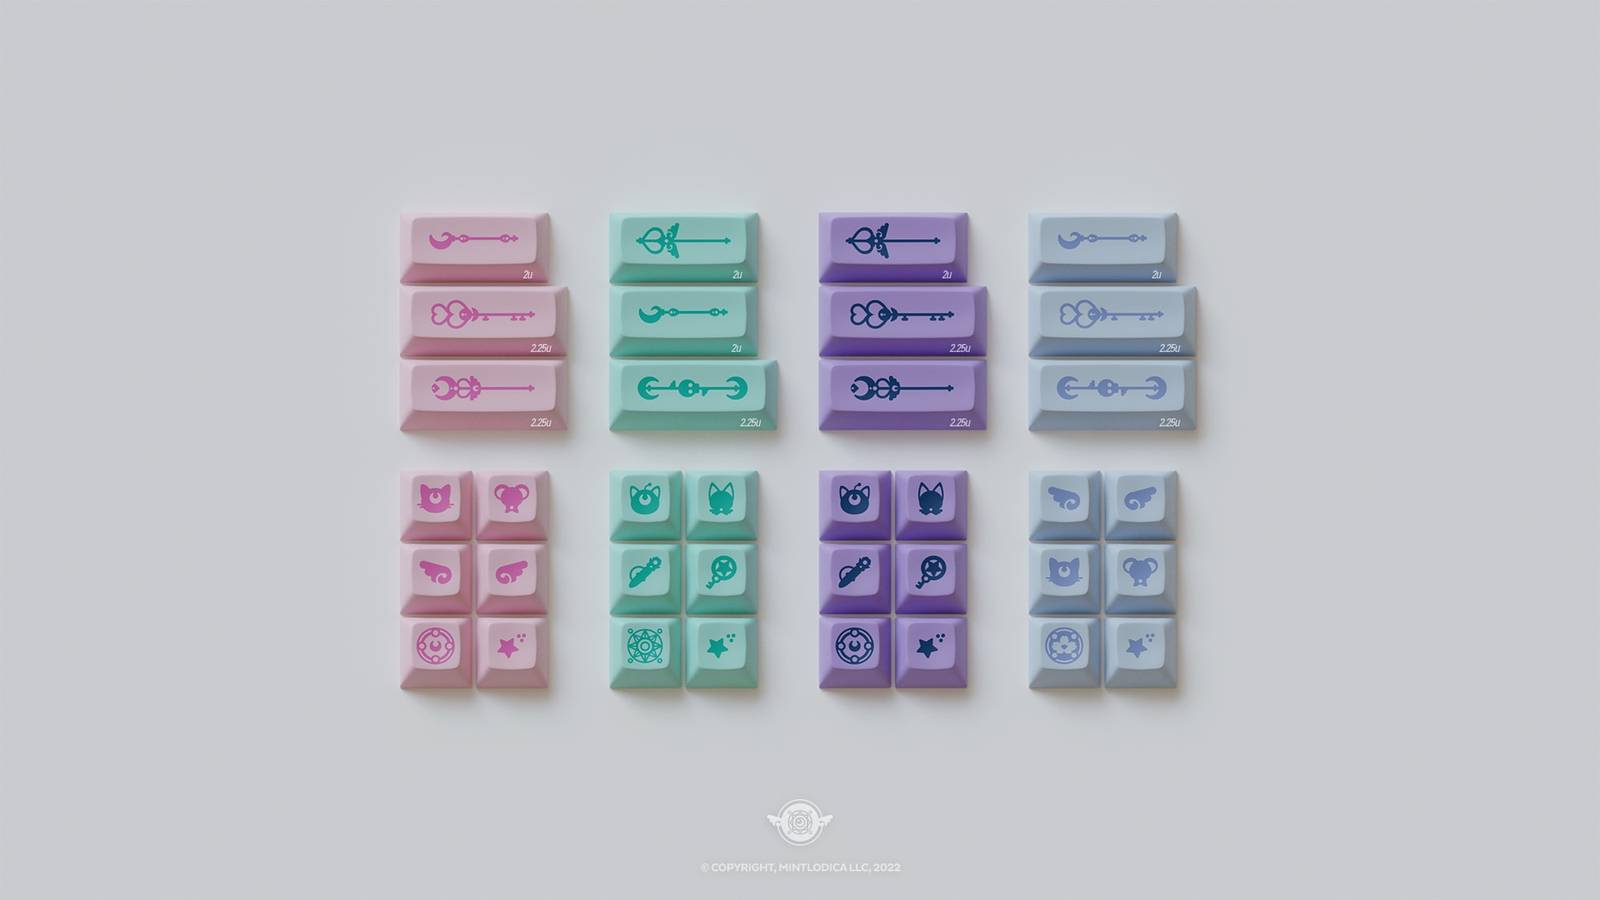 DSA Magic Girl keycaps by Mintlodica in Pink, Blue, Mint, and Purple featuring cute anime shoujo 1990s manga themed. This is an extra Novelties kit featuring additional Wand keycap not found in the Base Kits and even more 1u keys in all 4 mod colors for flexibility.